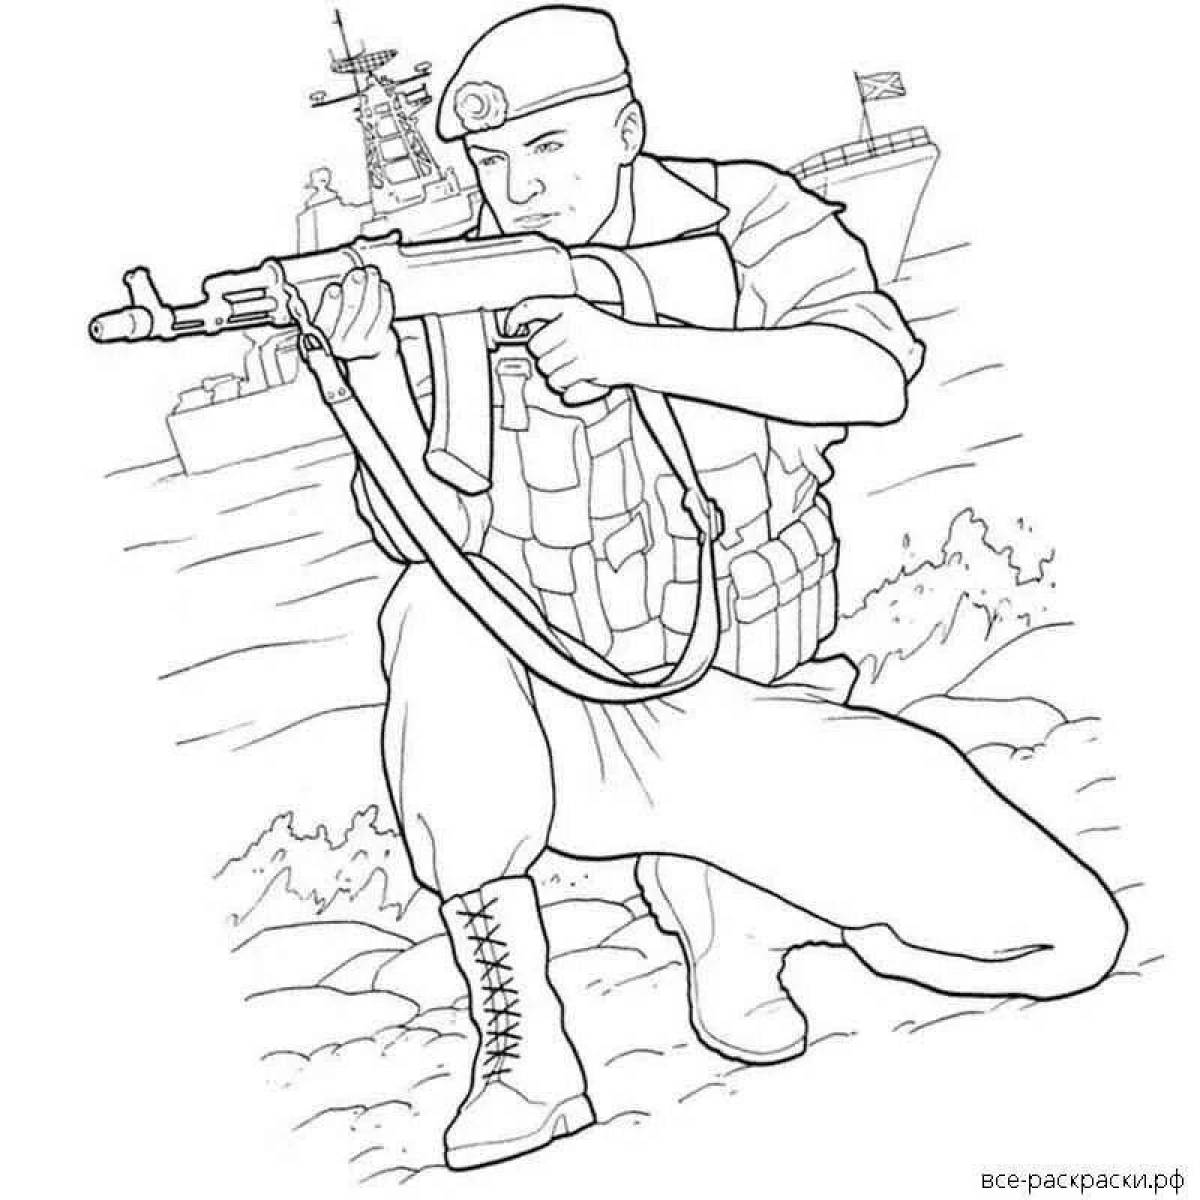 A strikingly imposing Russian soldier coloring book